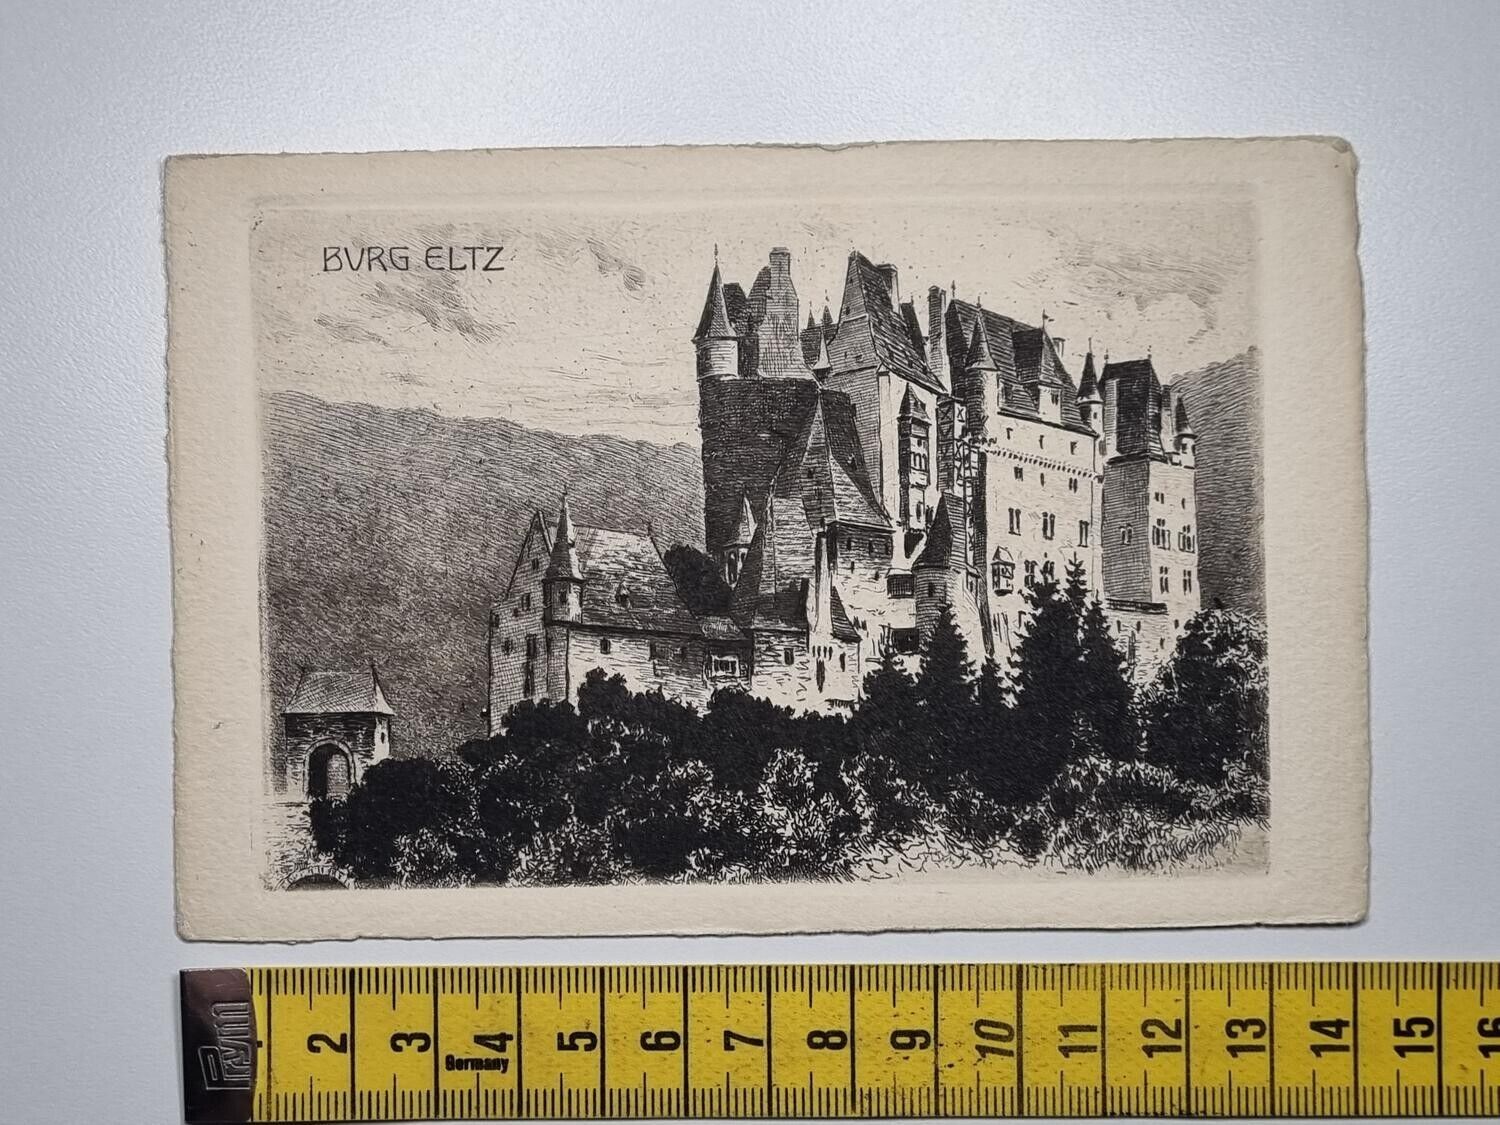 Rare old post card, Burg Eltz, Germany (around early 1900)